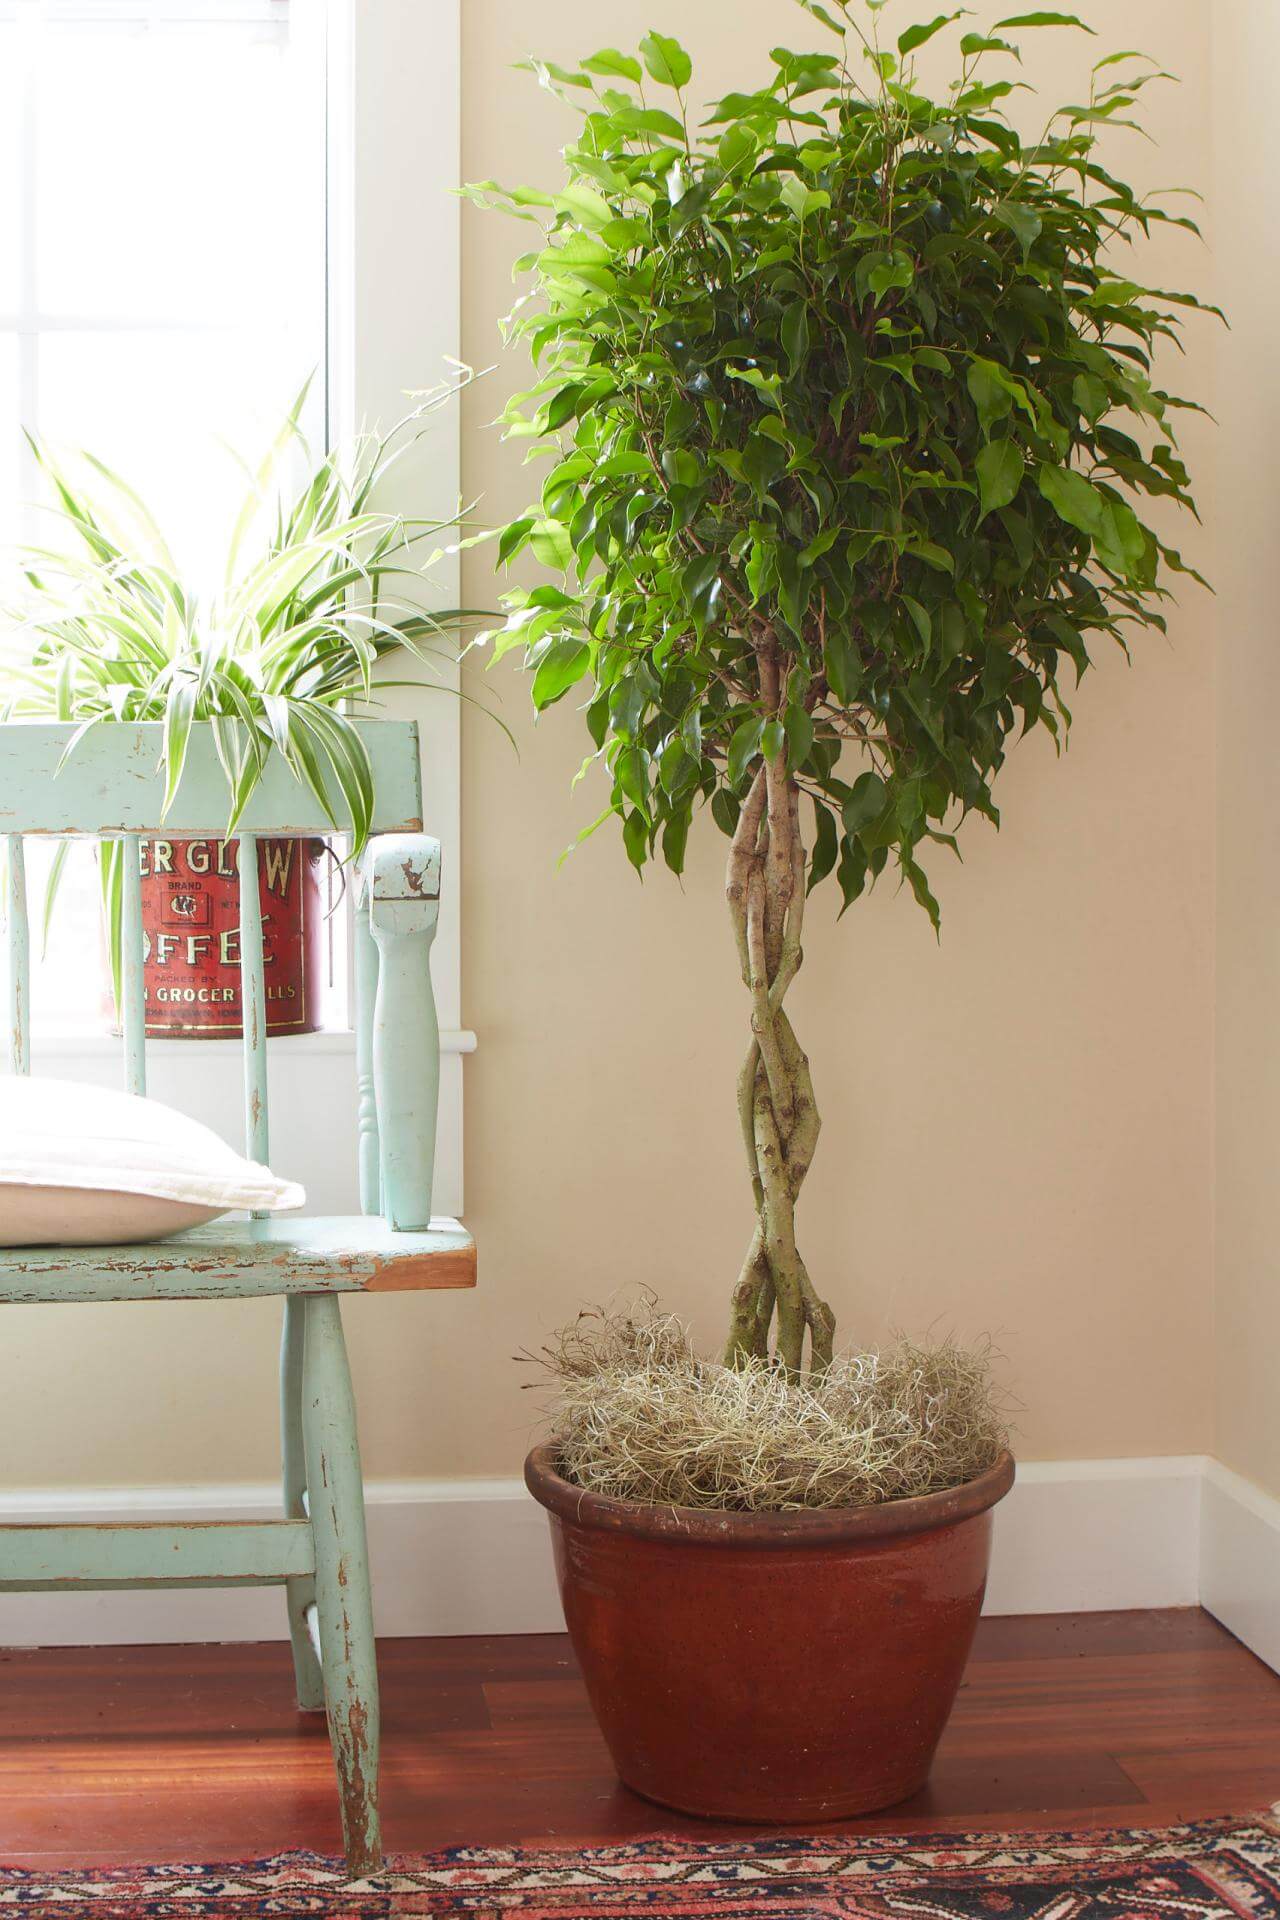 21 Tall Indoor Plants With Big Leaves - The Architecture Designs